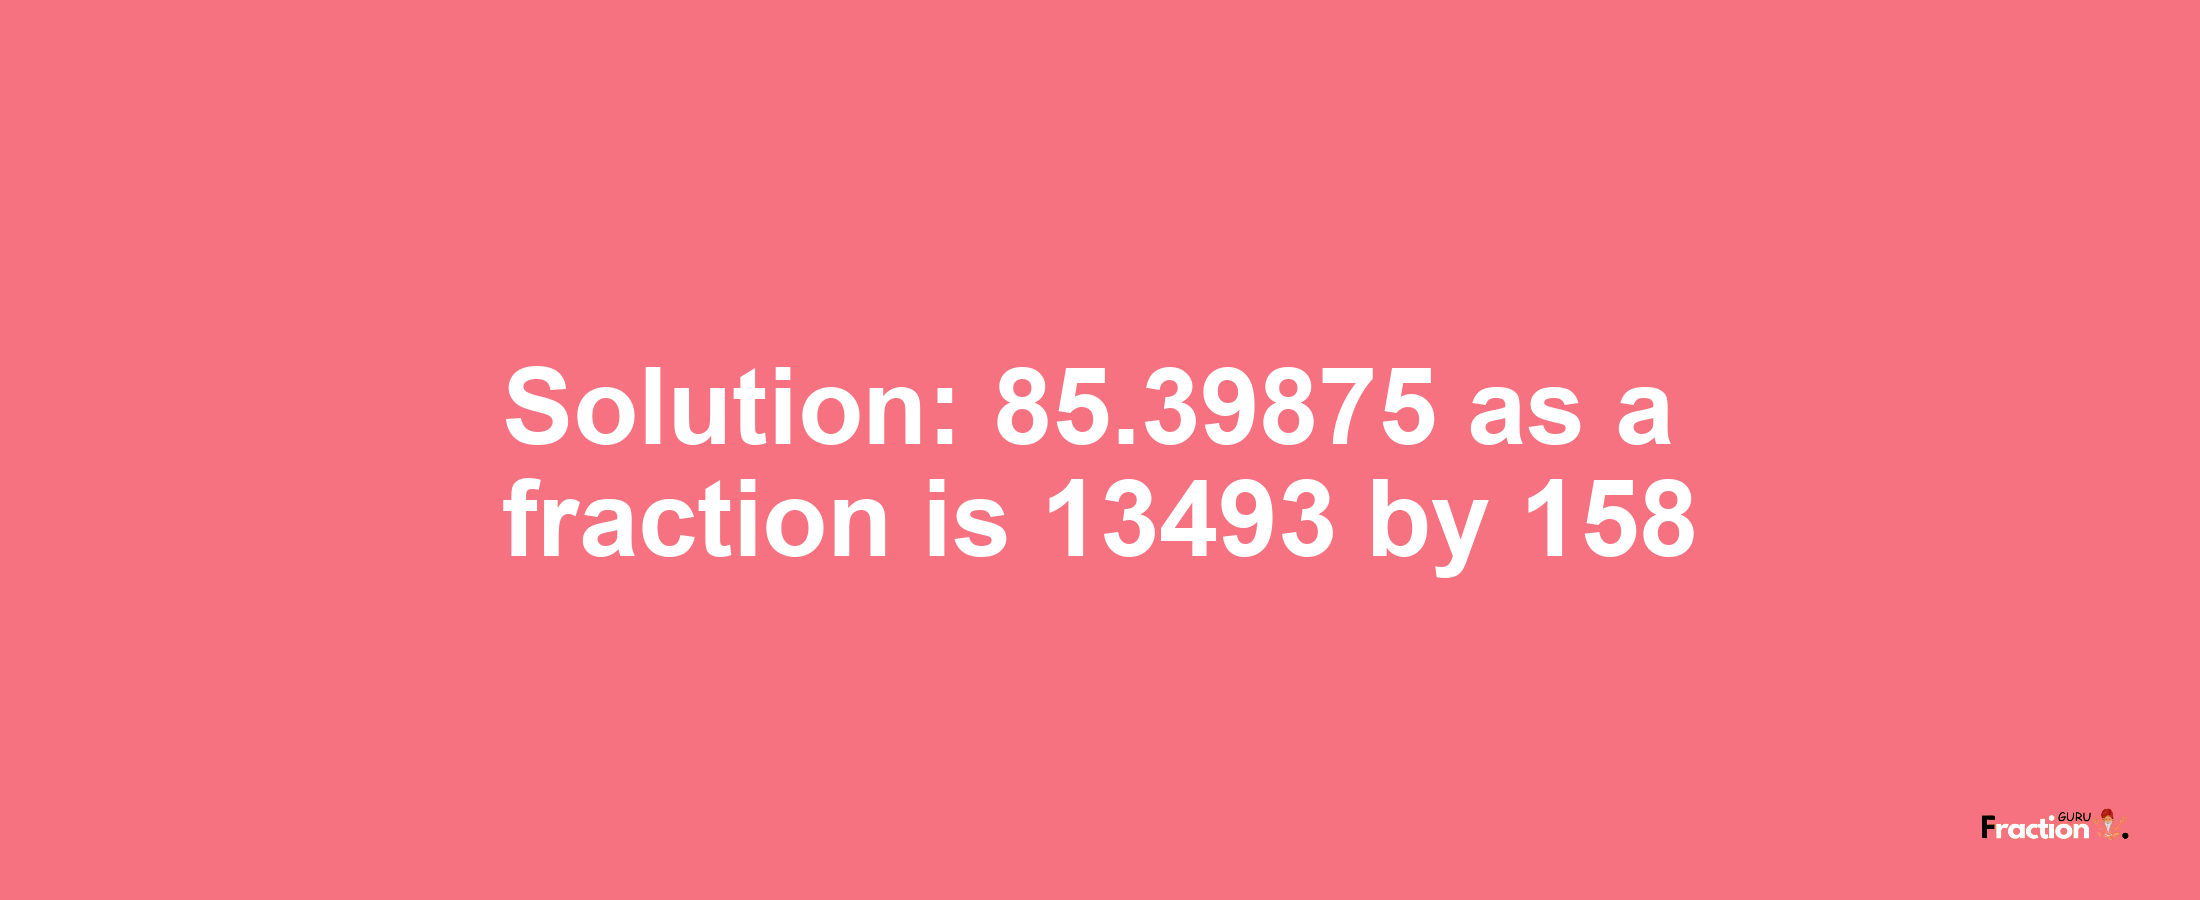 Solution:85.39875 as a fraction is 13493/158